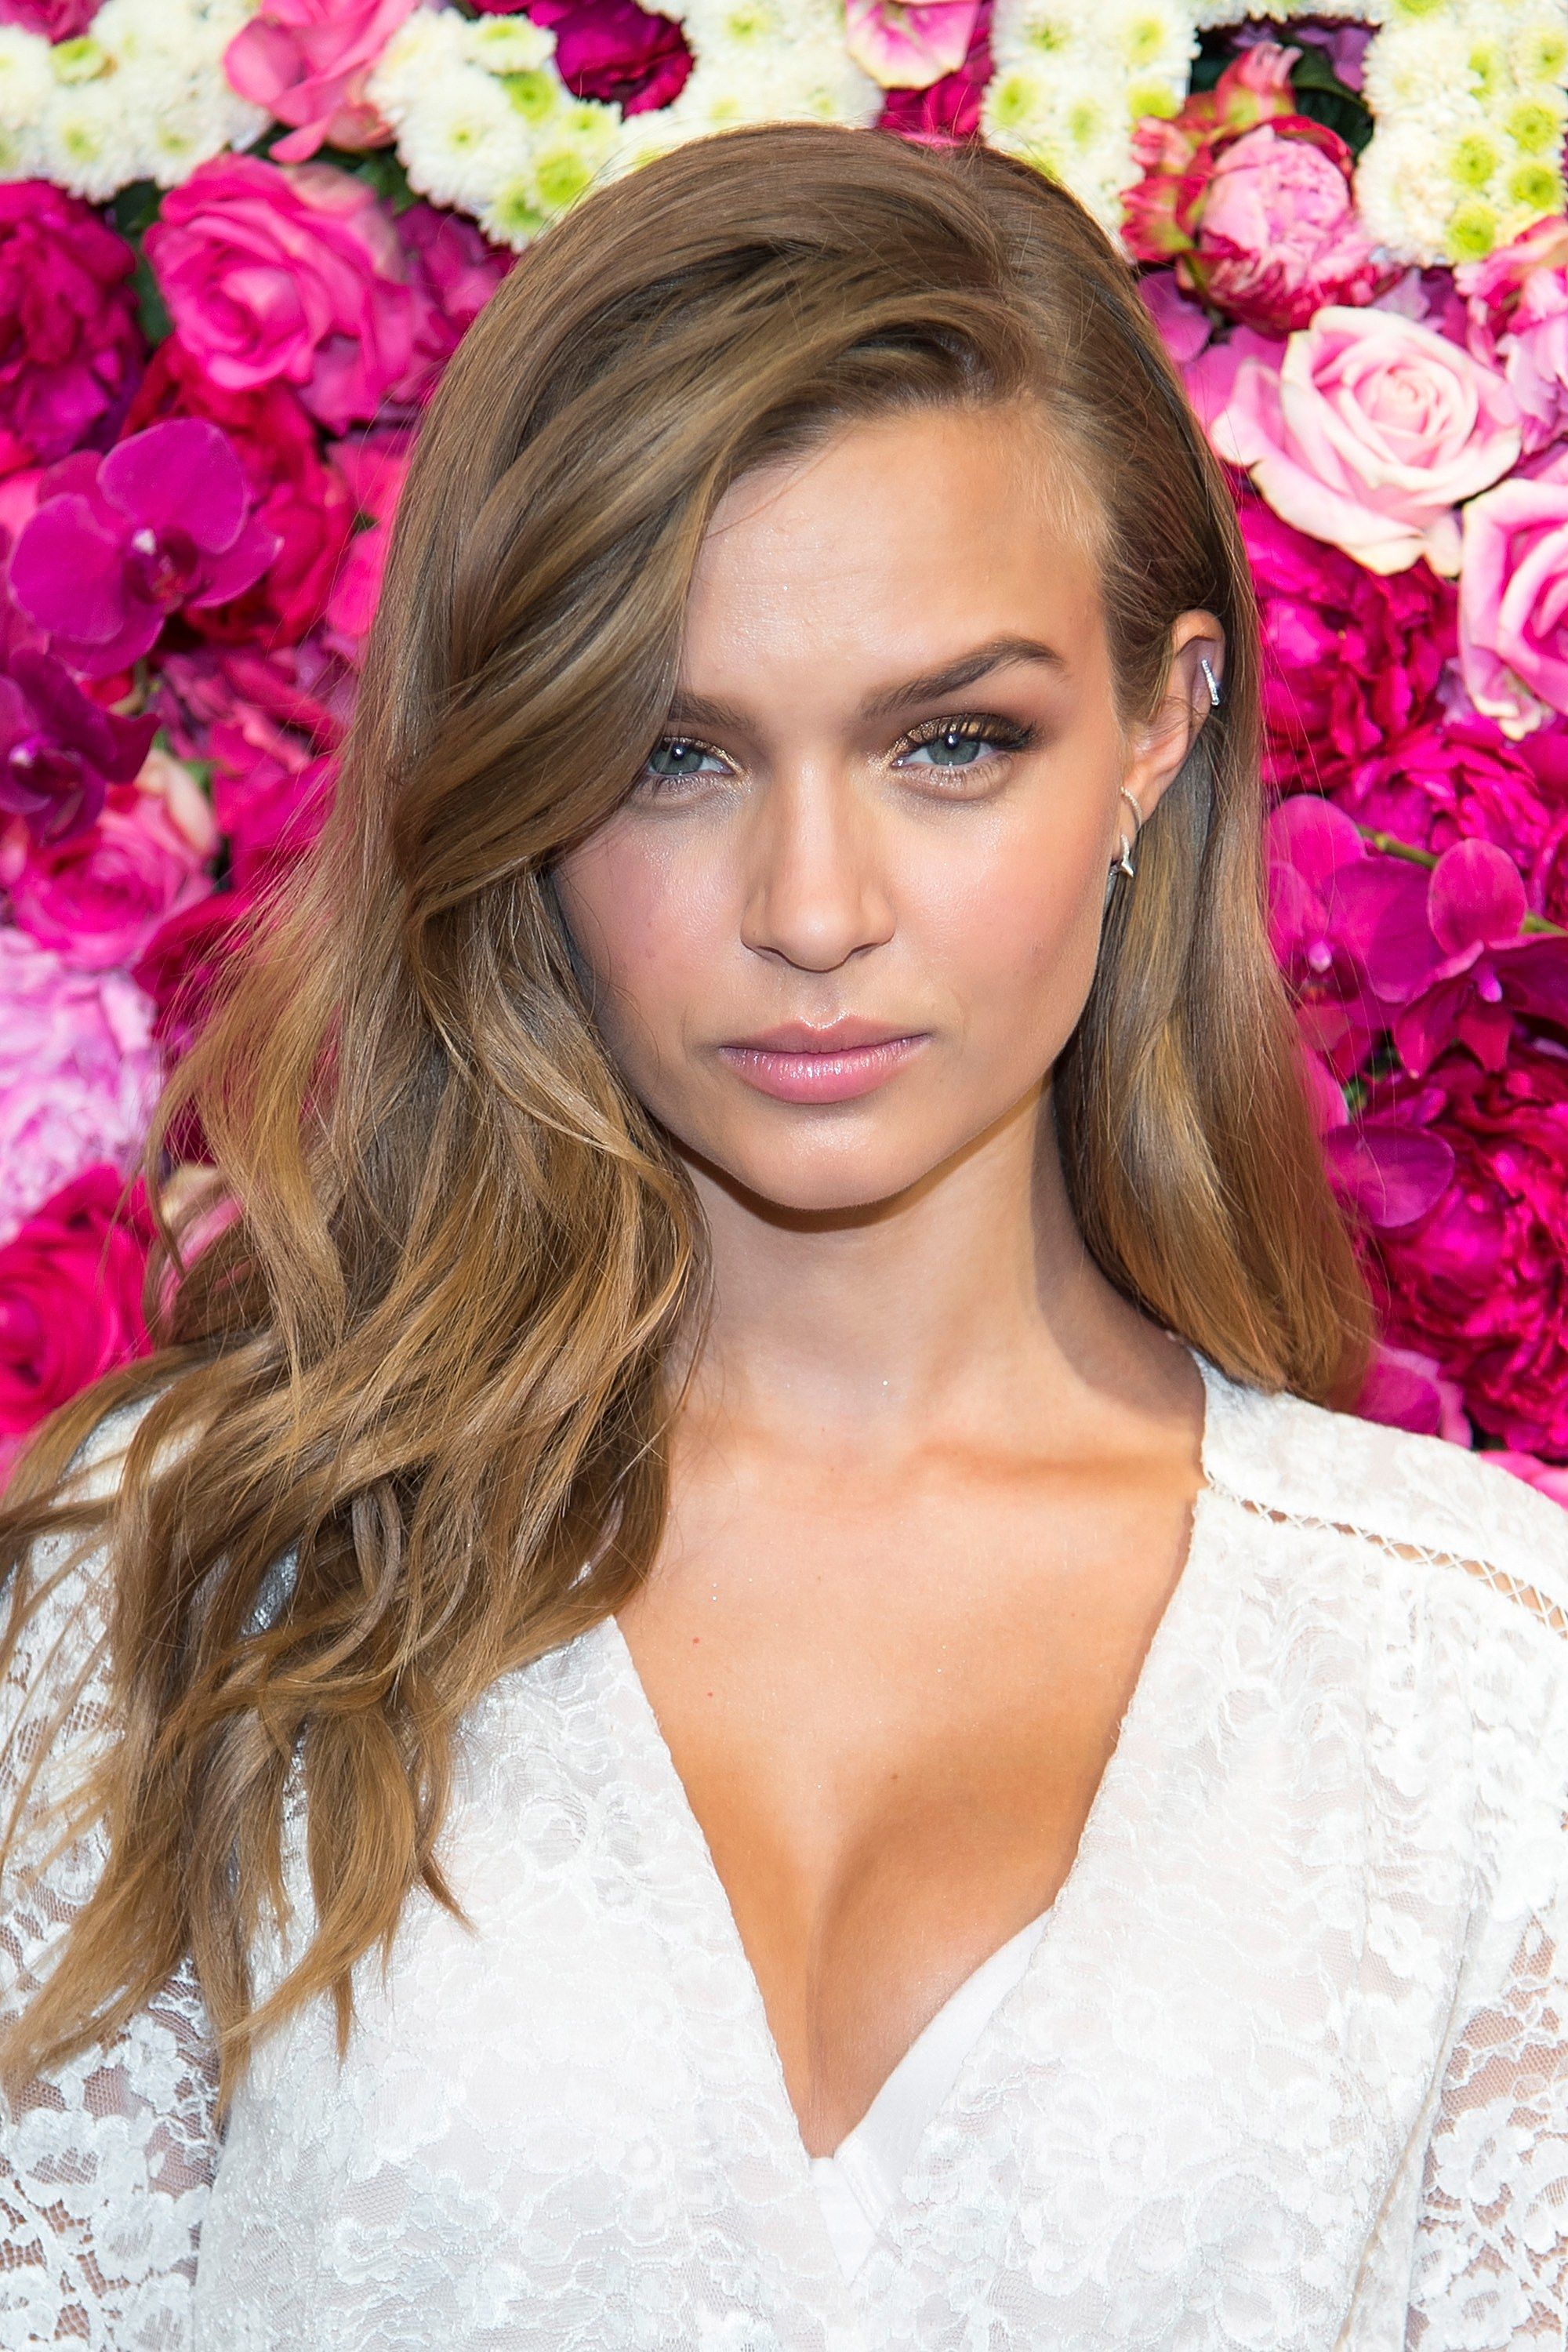 Victoria's Secret Angel Josephine Skriver Recommends Using Coconut Oil for  Just About Everything | Beautiful hair, Honey hair, Hair inspiration